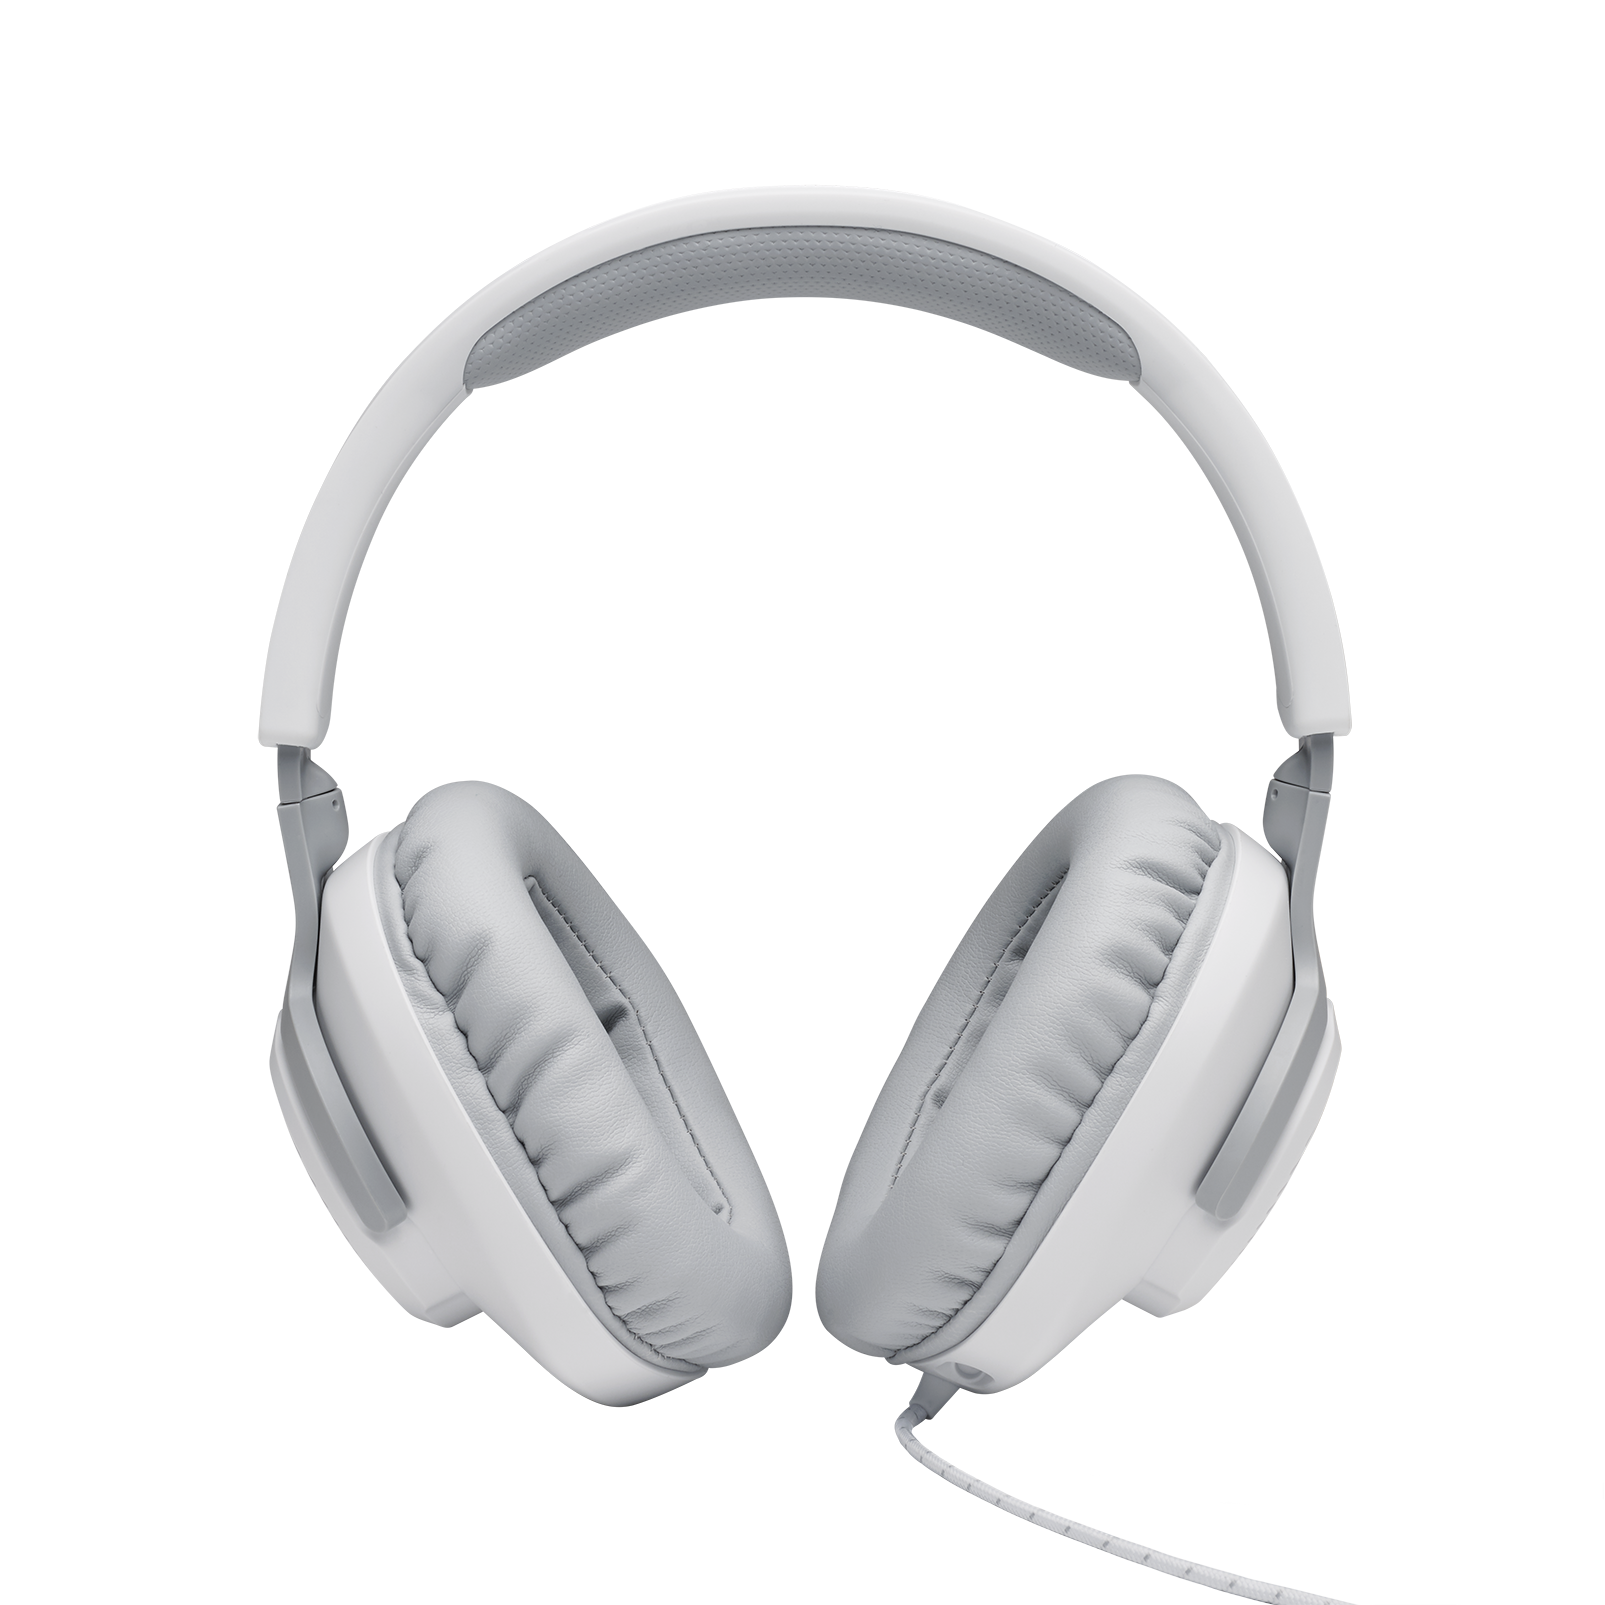 JBL Quantum 100 - White - Wired over-ear gaming headset with flip-up mic - Detailshot 2